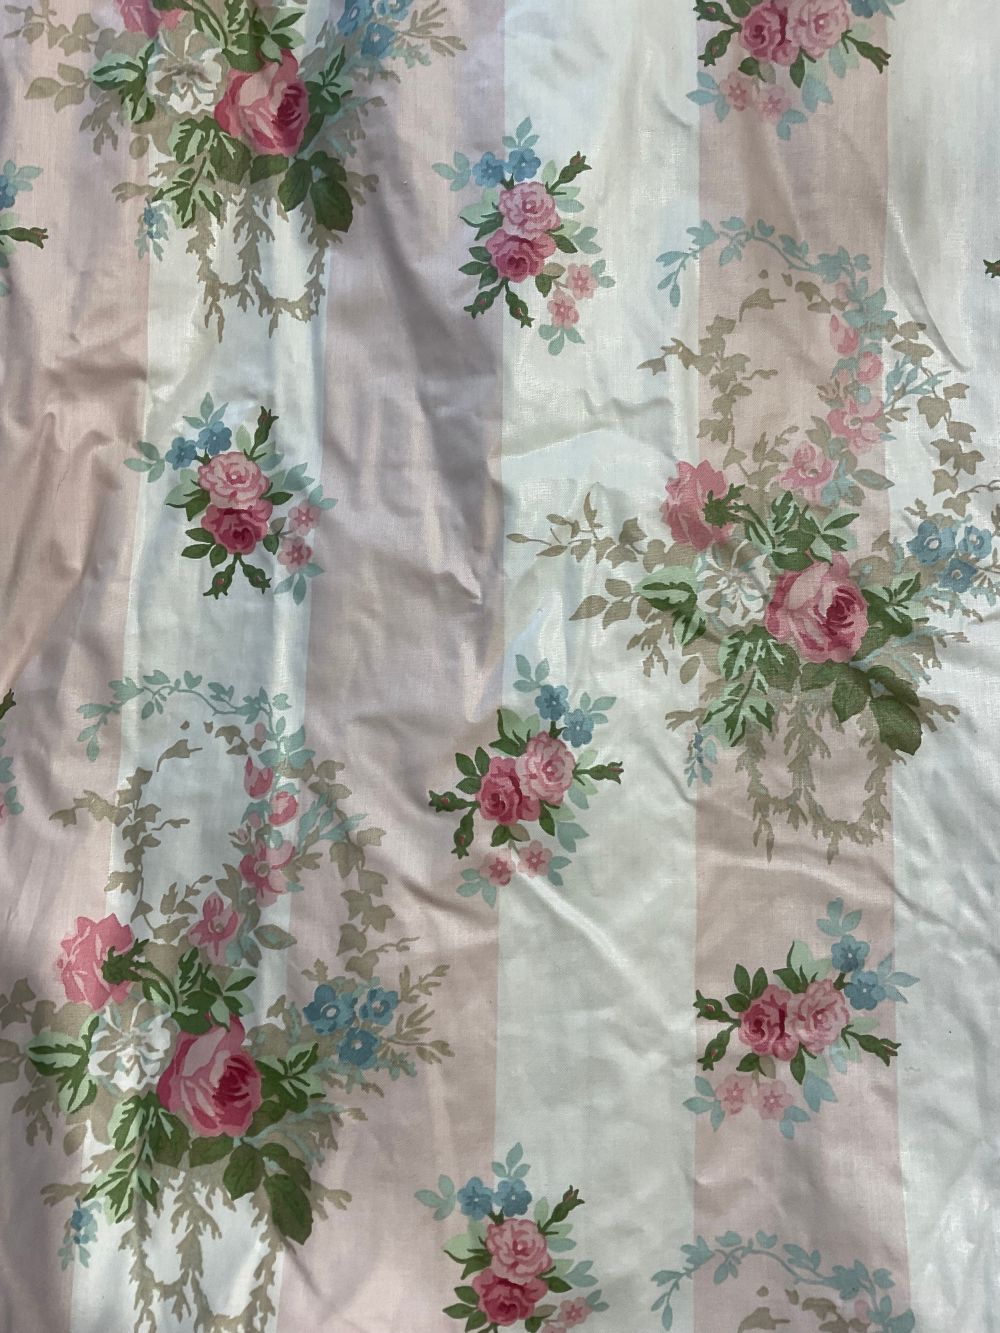 Textiles - a pair of Laura Ashley glazed floral curtains, Rosebuds, 175cm x 260cm - Image 2 of 3